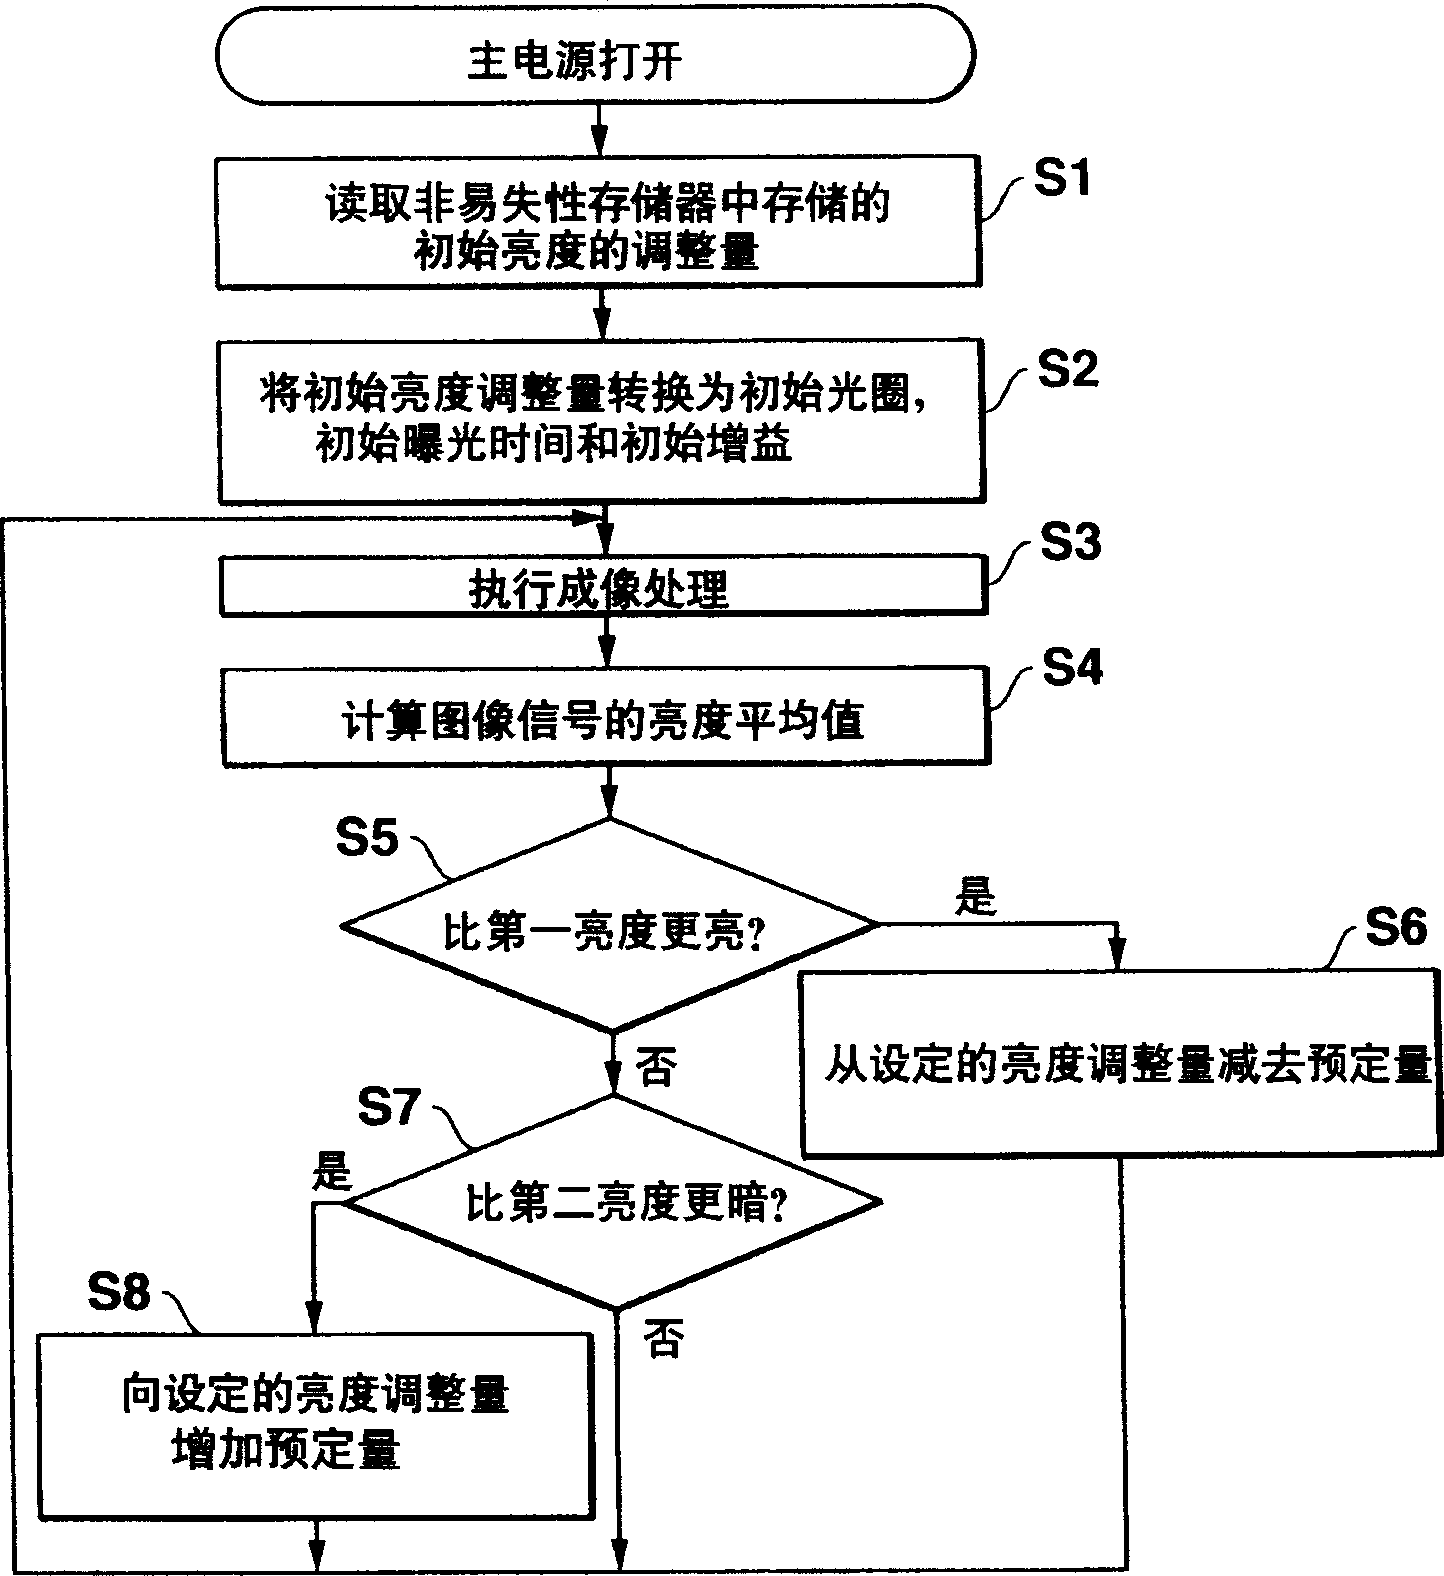 Imaging apparatus including automatic brightness adjustment function and imaging method